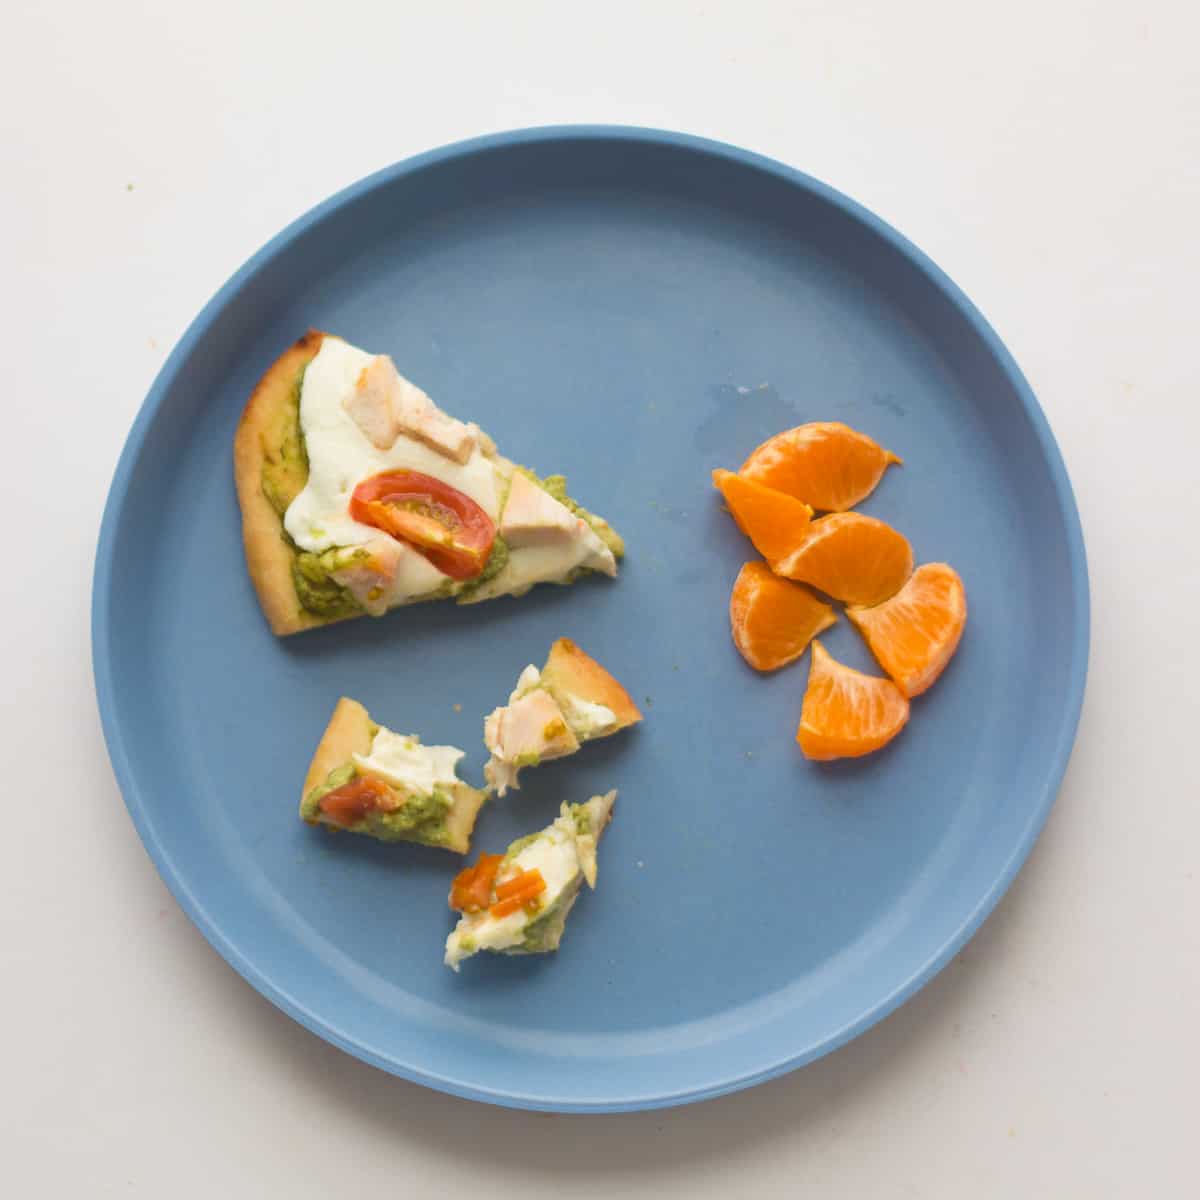 a small slice and bite sized pieces of pizza with diced oranges.